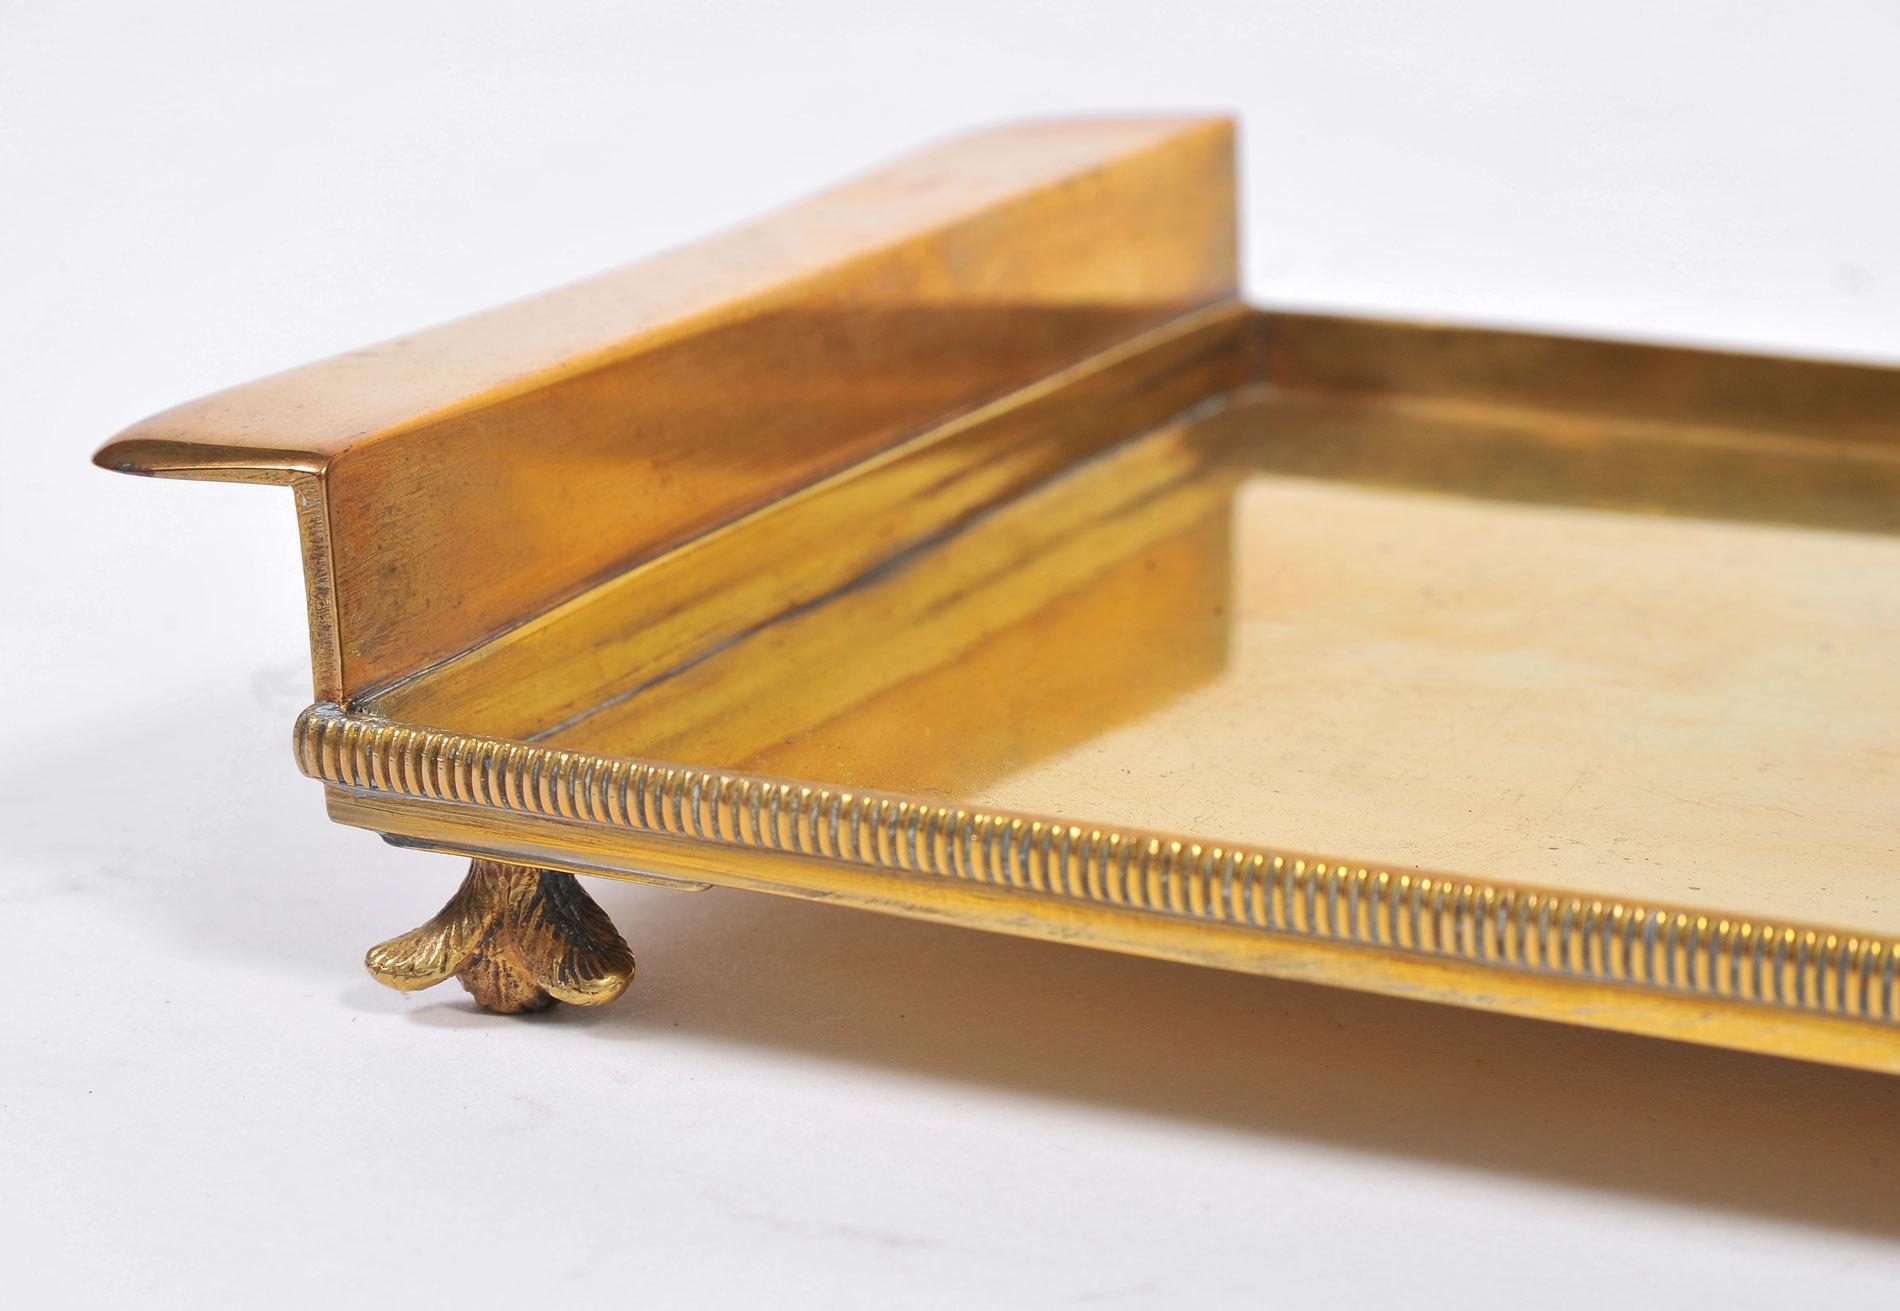 Occasional solid brass tray with decorative flower-bud feet, delicately ribbed sides and shaped handles.